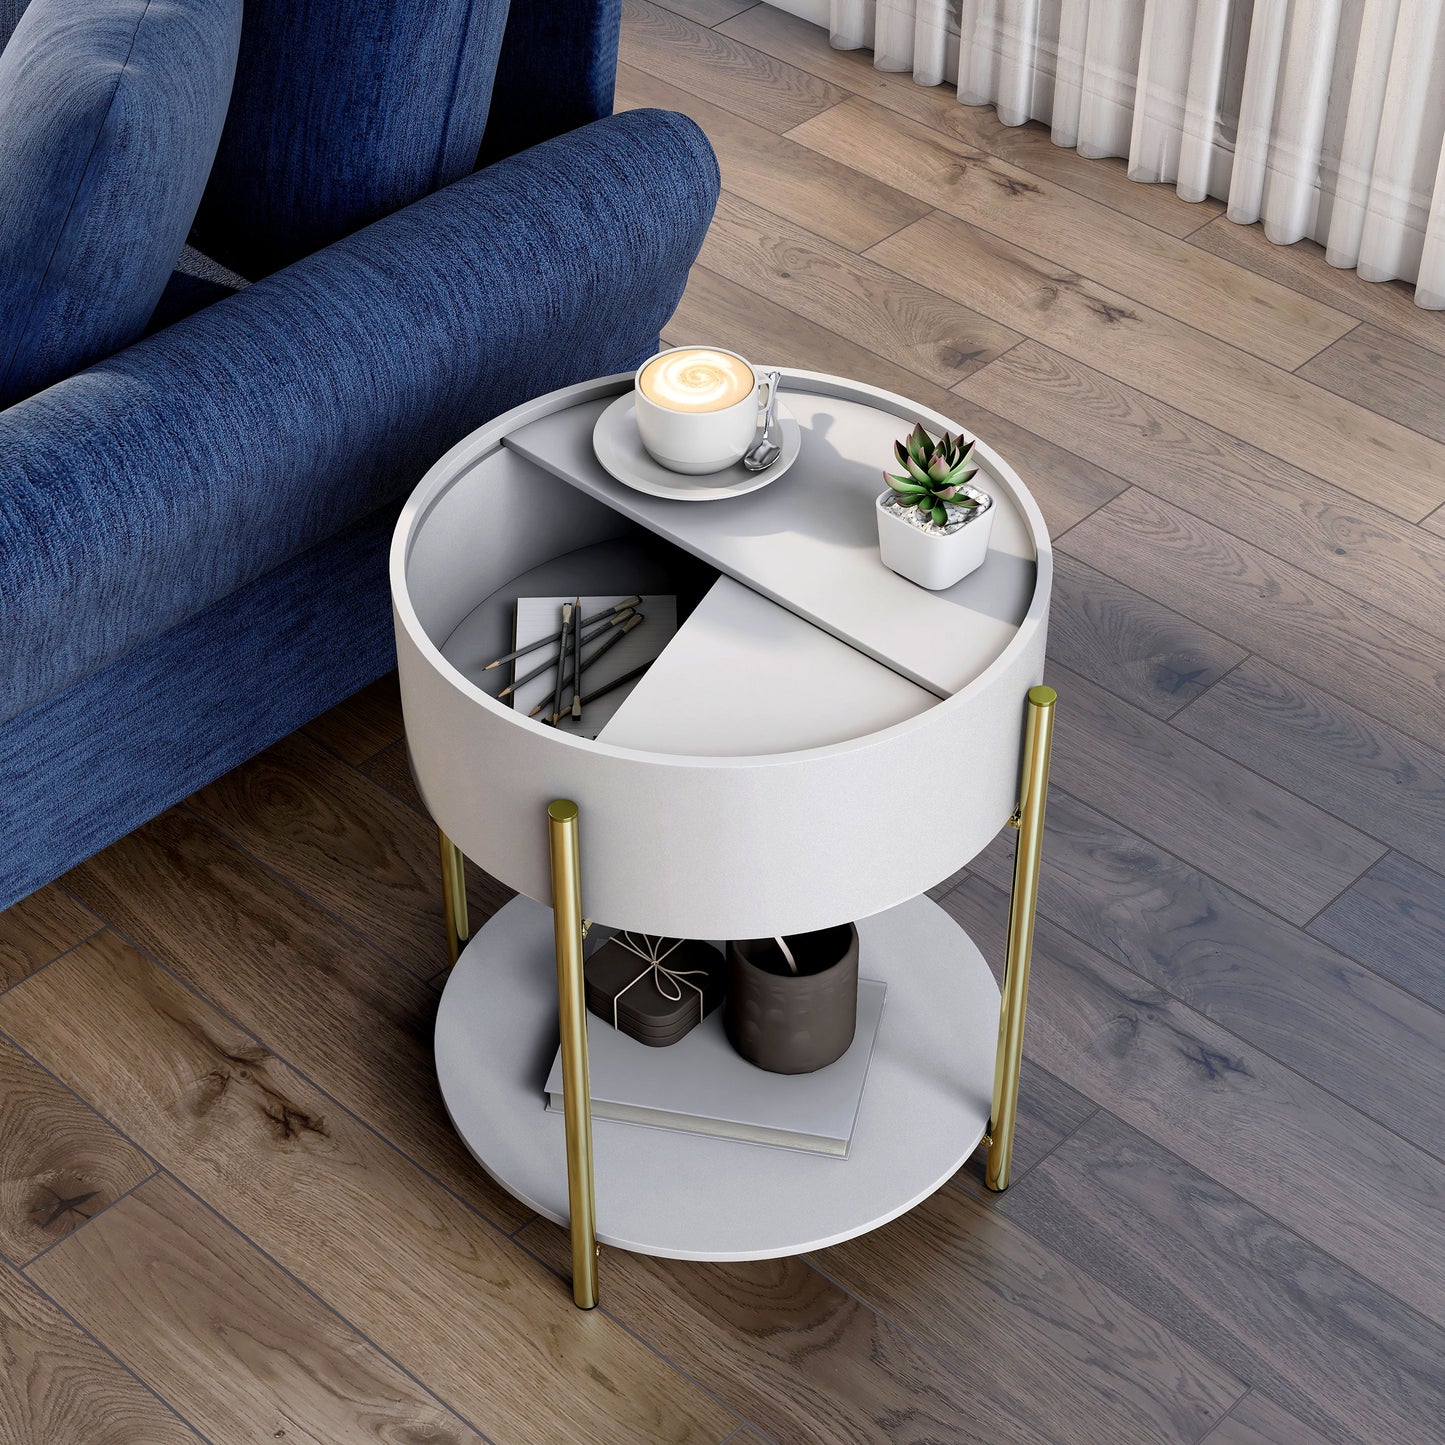 Left angled bird's eye view of a modern white and gold round storage end table with top partially open in a living room with accessories